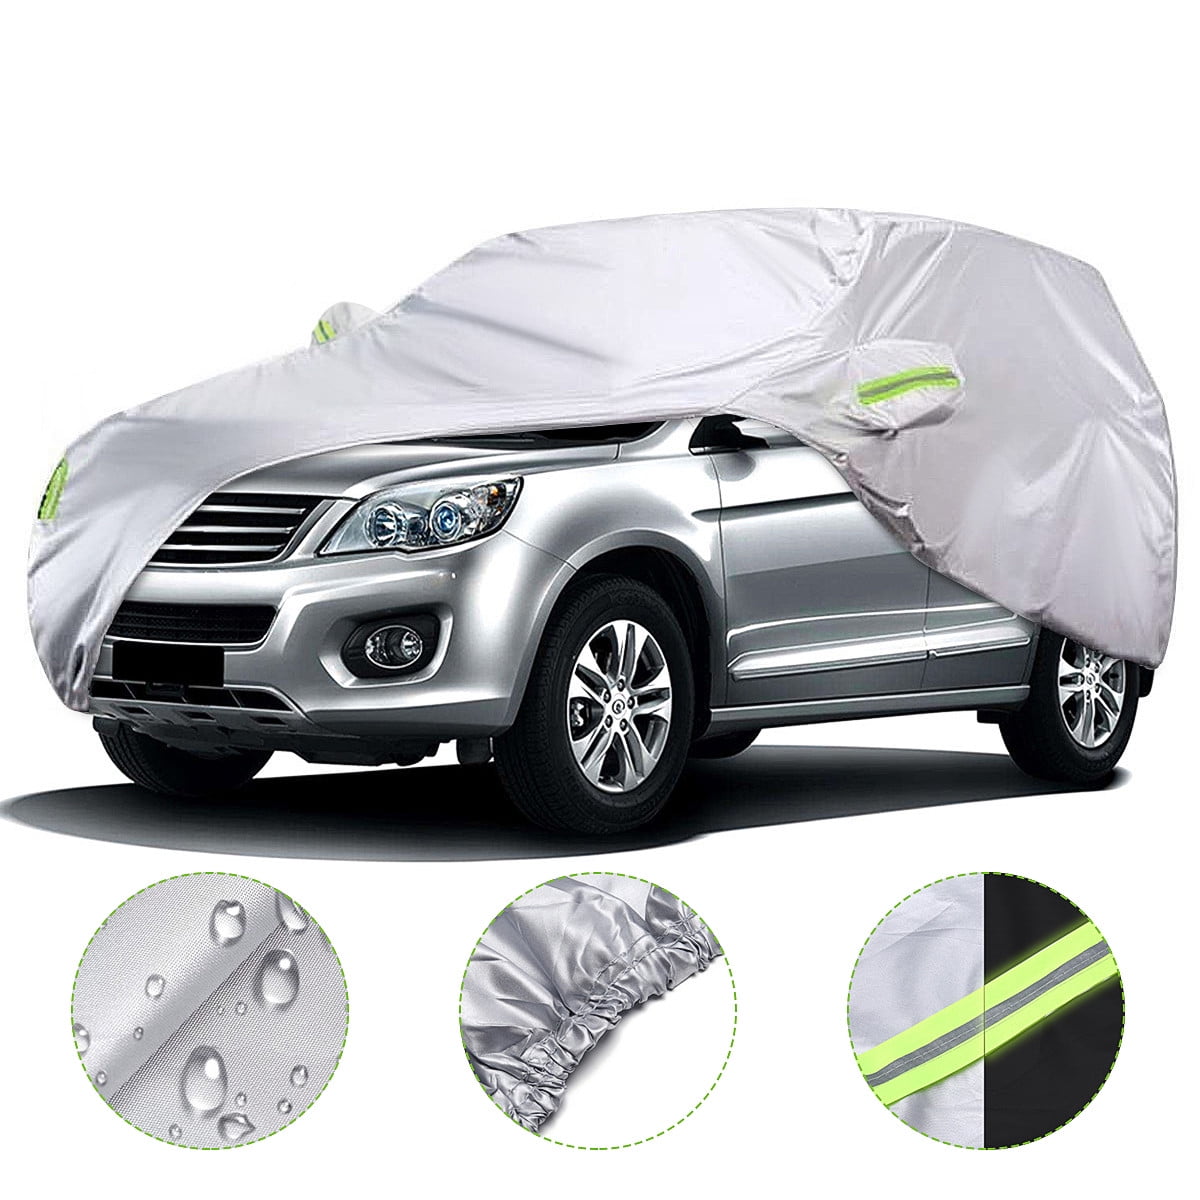 190t Car Cover SUV Protection Cover Waterproof All Weather Weatherproof UV Sun Protection Snow Dust Storm Resistant Outdoor Car Cover (xxl 208.66